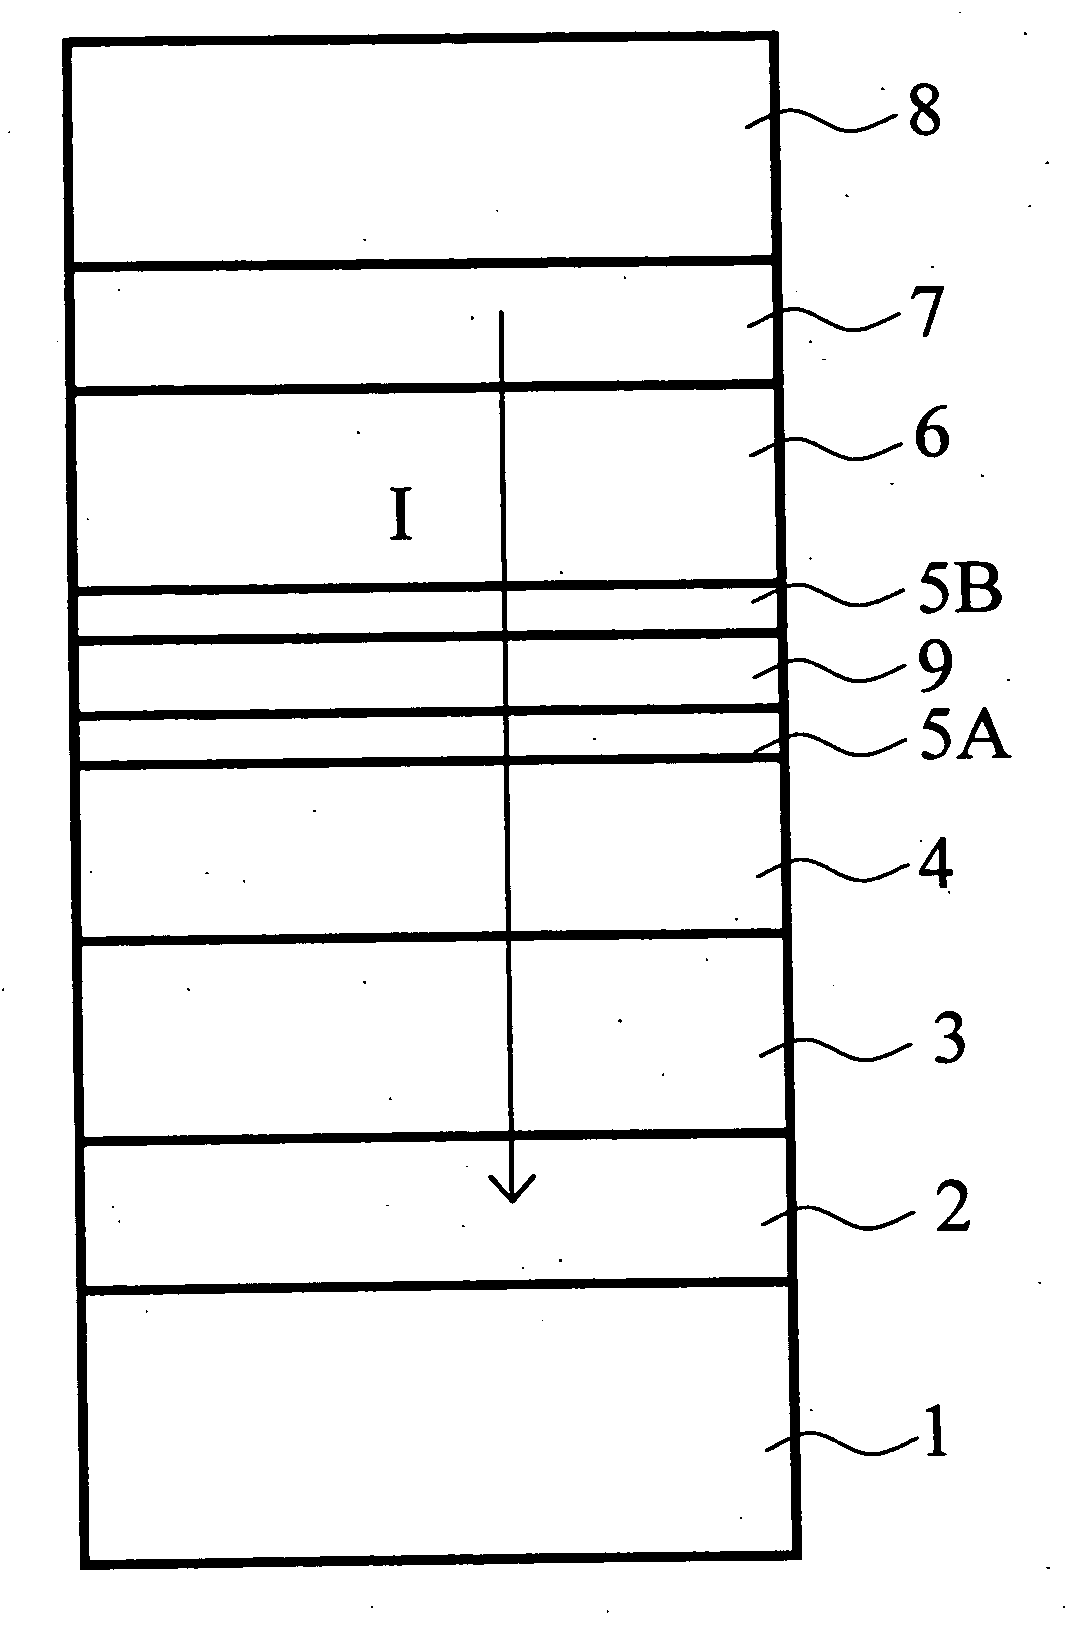 Magnetoresistance effect element having a nonmagnetic intermediate layer having a two-dimensional fluctuation of resistance